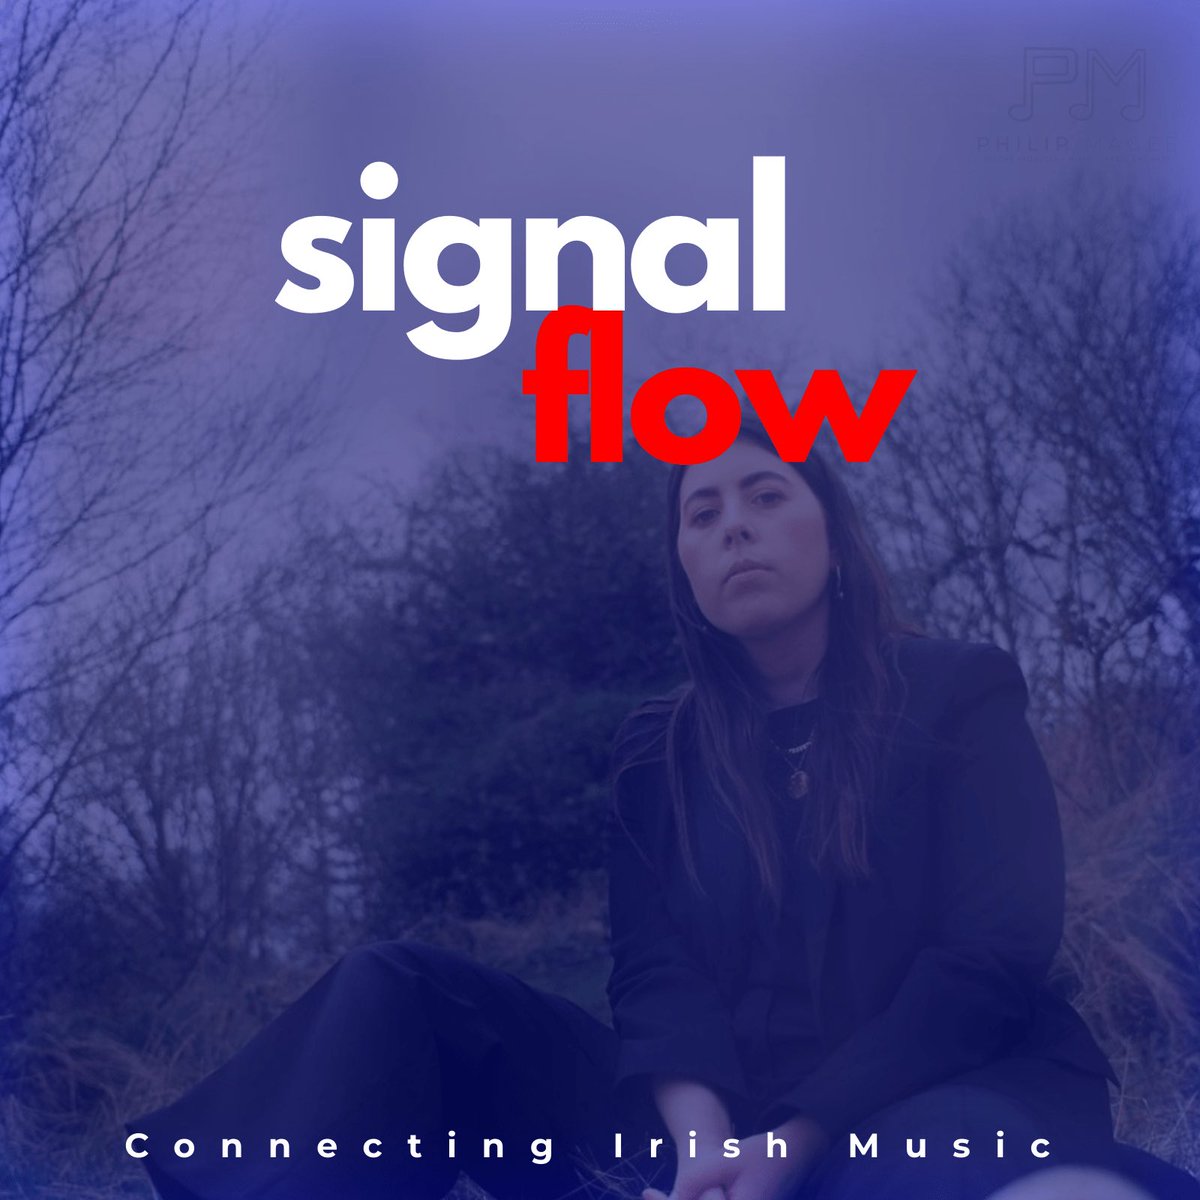 Signal Flow Update🚨 Playlist celebrating the best new Irish music! Listen to find your new favourite artist🎶 Curated by me and @philipmagee Follow on @Spotify ➡️ sptfy.com/9eqP Cover artist - @SorchaRichardsn (latest single // Archie) #newirishmusic